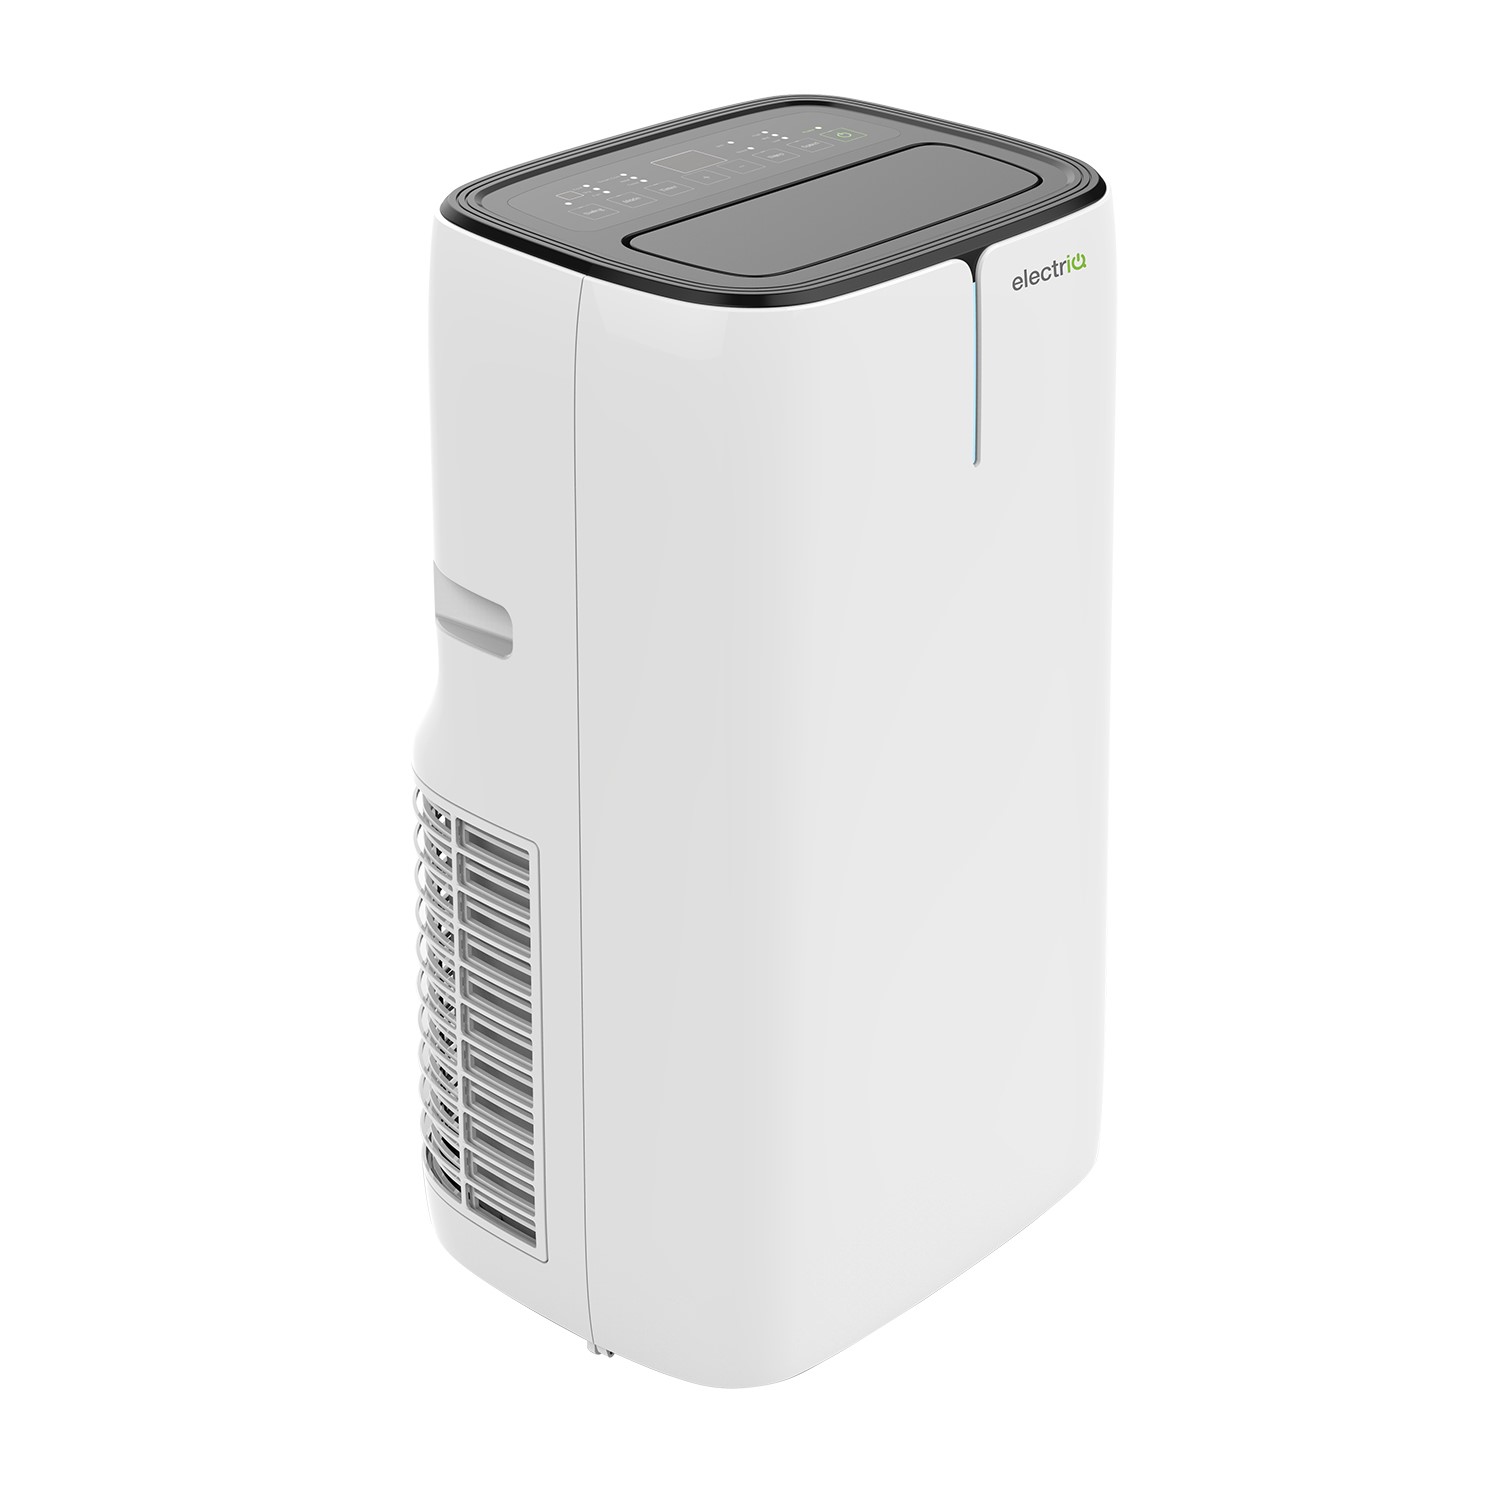 GRADE A3 - EcoSilent 12000 BTU SMART WIFI App Alexa Portable Air Conditioner with Heat Pump - for rooms up to 30 sqm